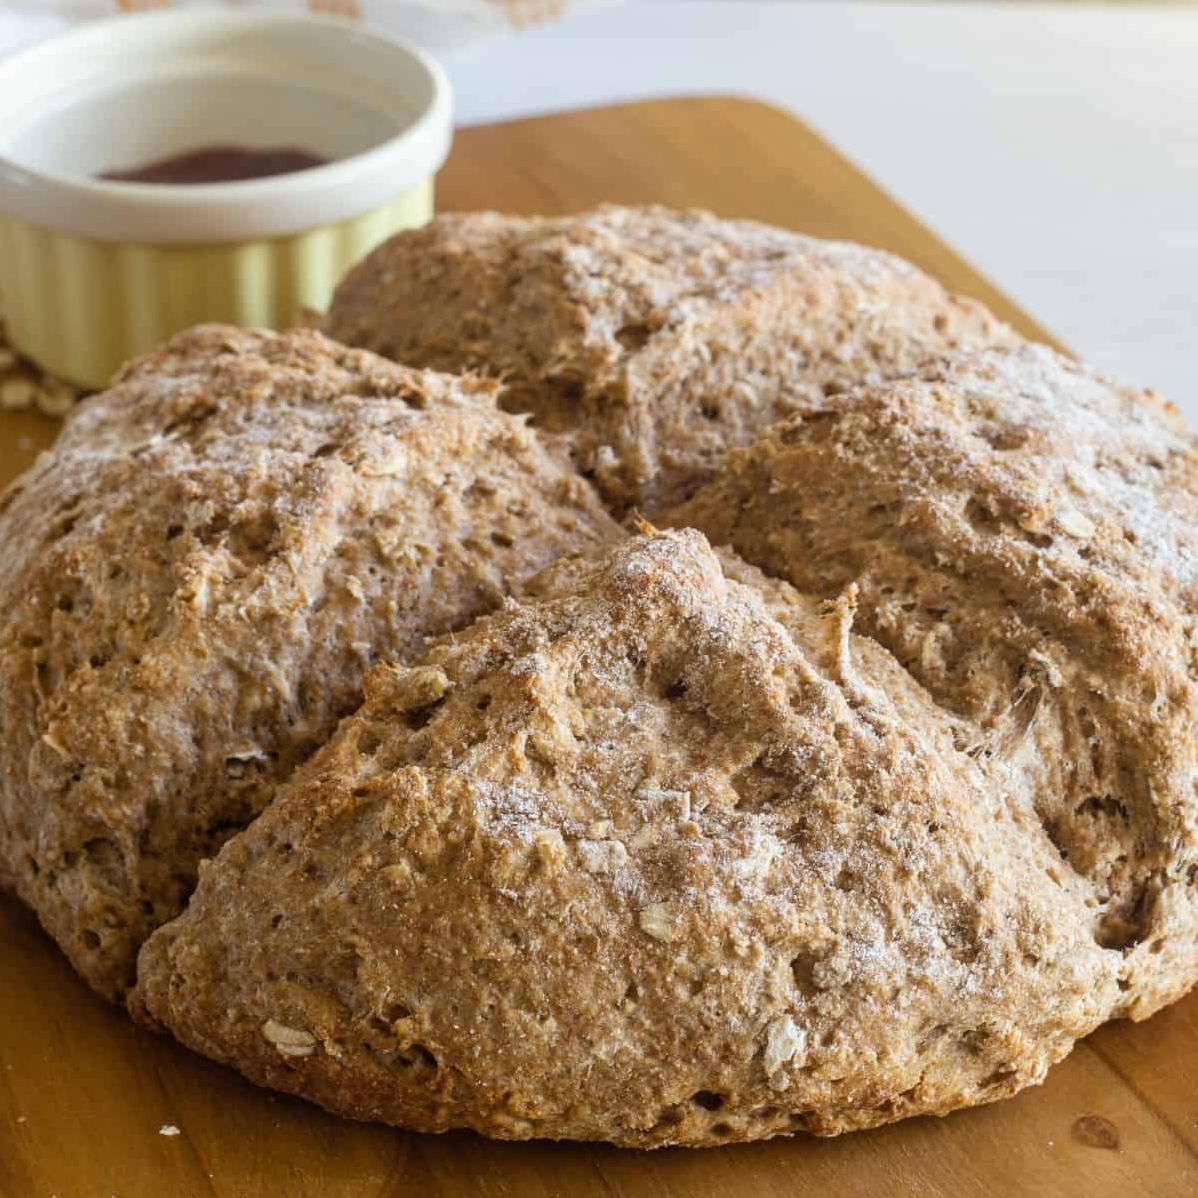  Thickly sliced Irish brown bread, with its nutty flavor and crunchy crust, makes the ultimate sandwich bread.